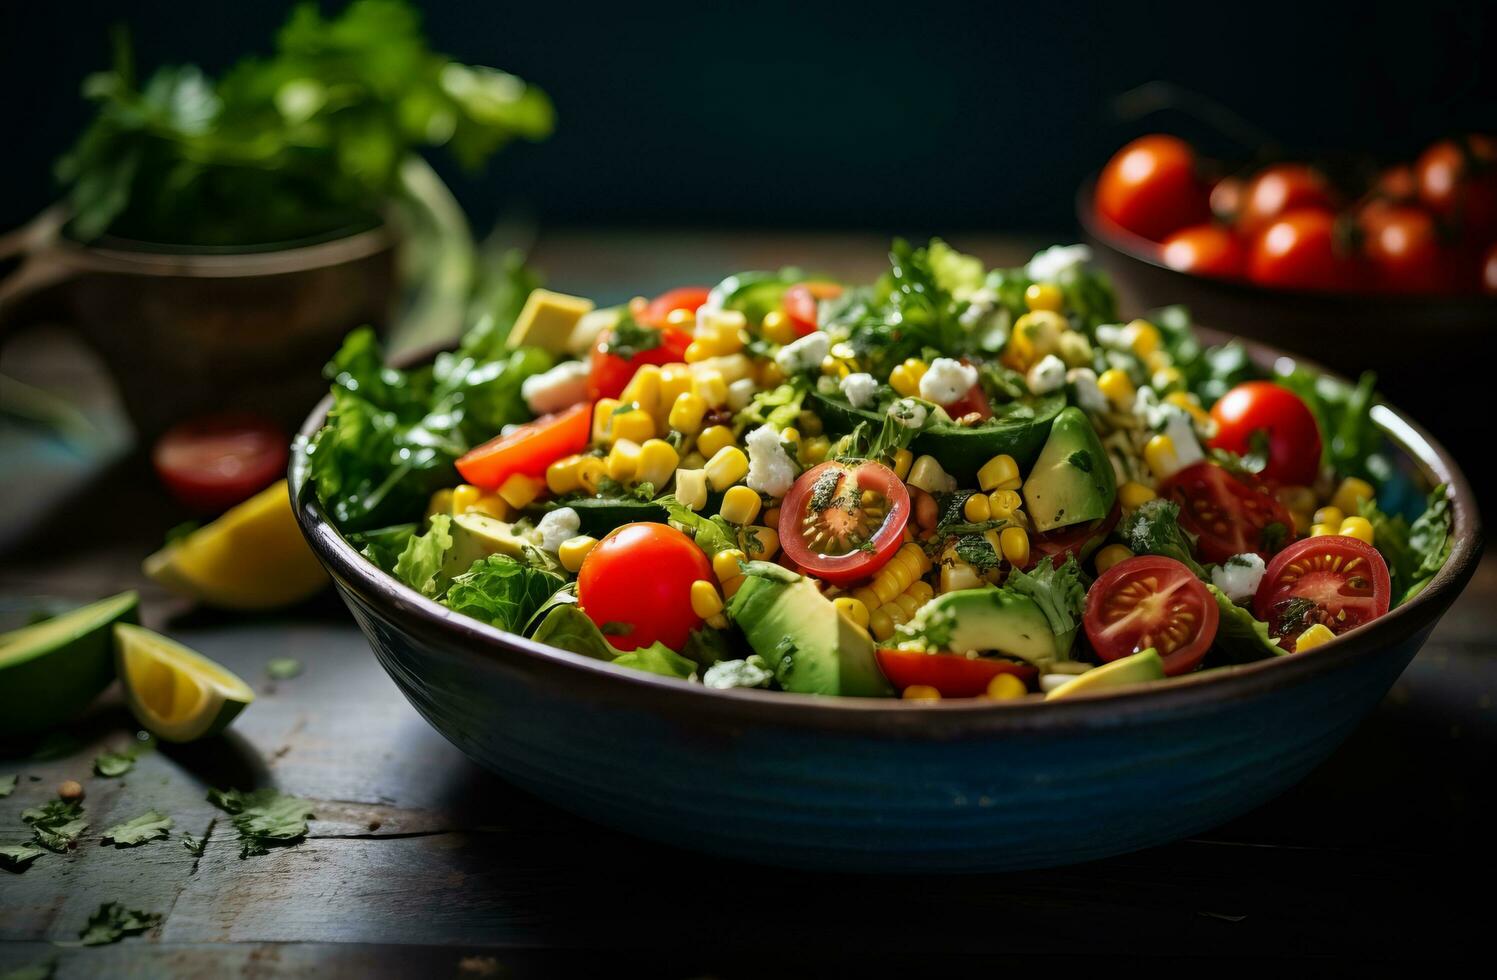 A bowl of salad with ripened tomatoes, corn and greens photo